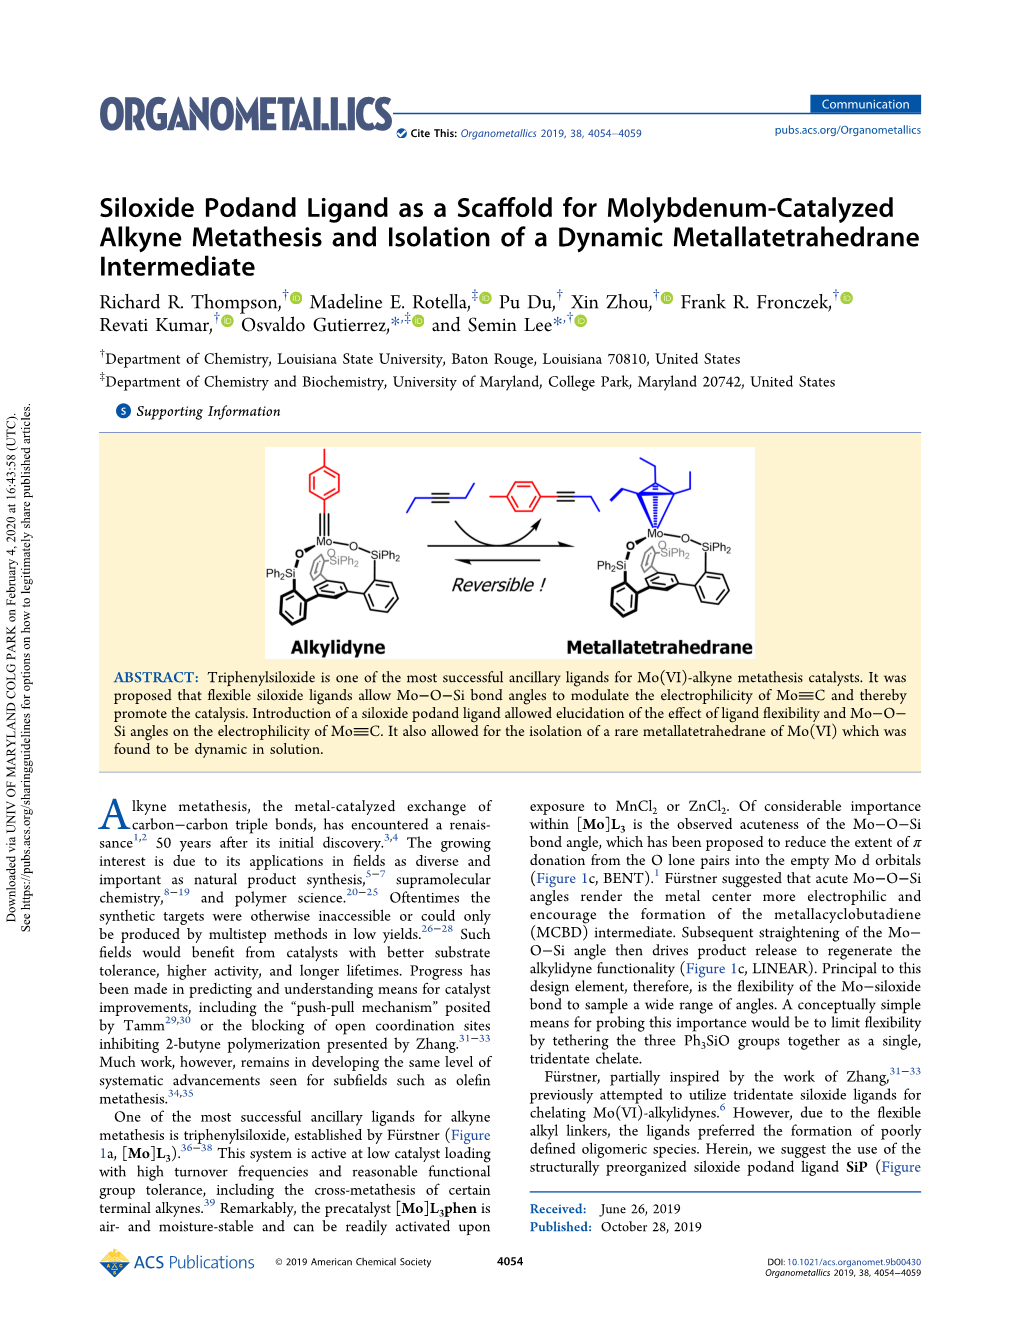 Siloxide Podand Ligand As a Scaffold for Molybdenum-Catalyzed Alkyne Metathesis and Isolation of a Dynamic Metallatetrahedrane I